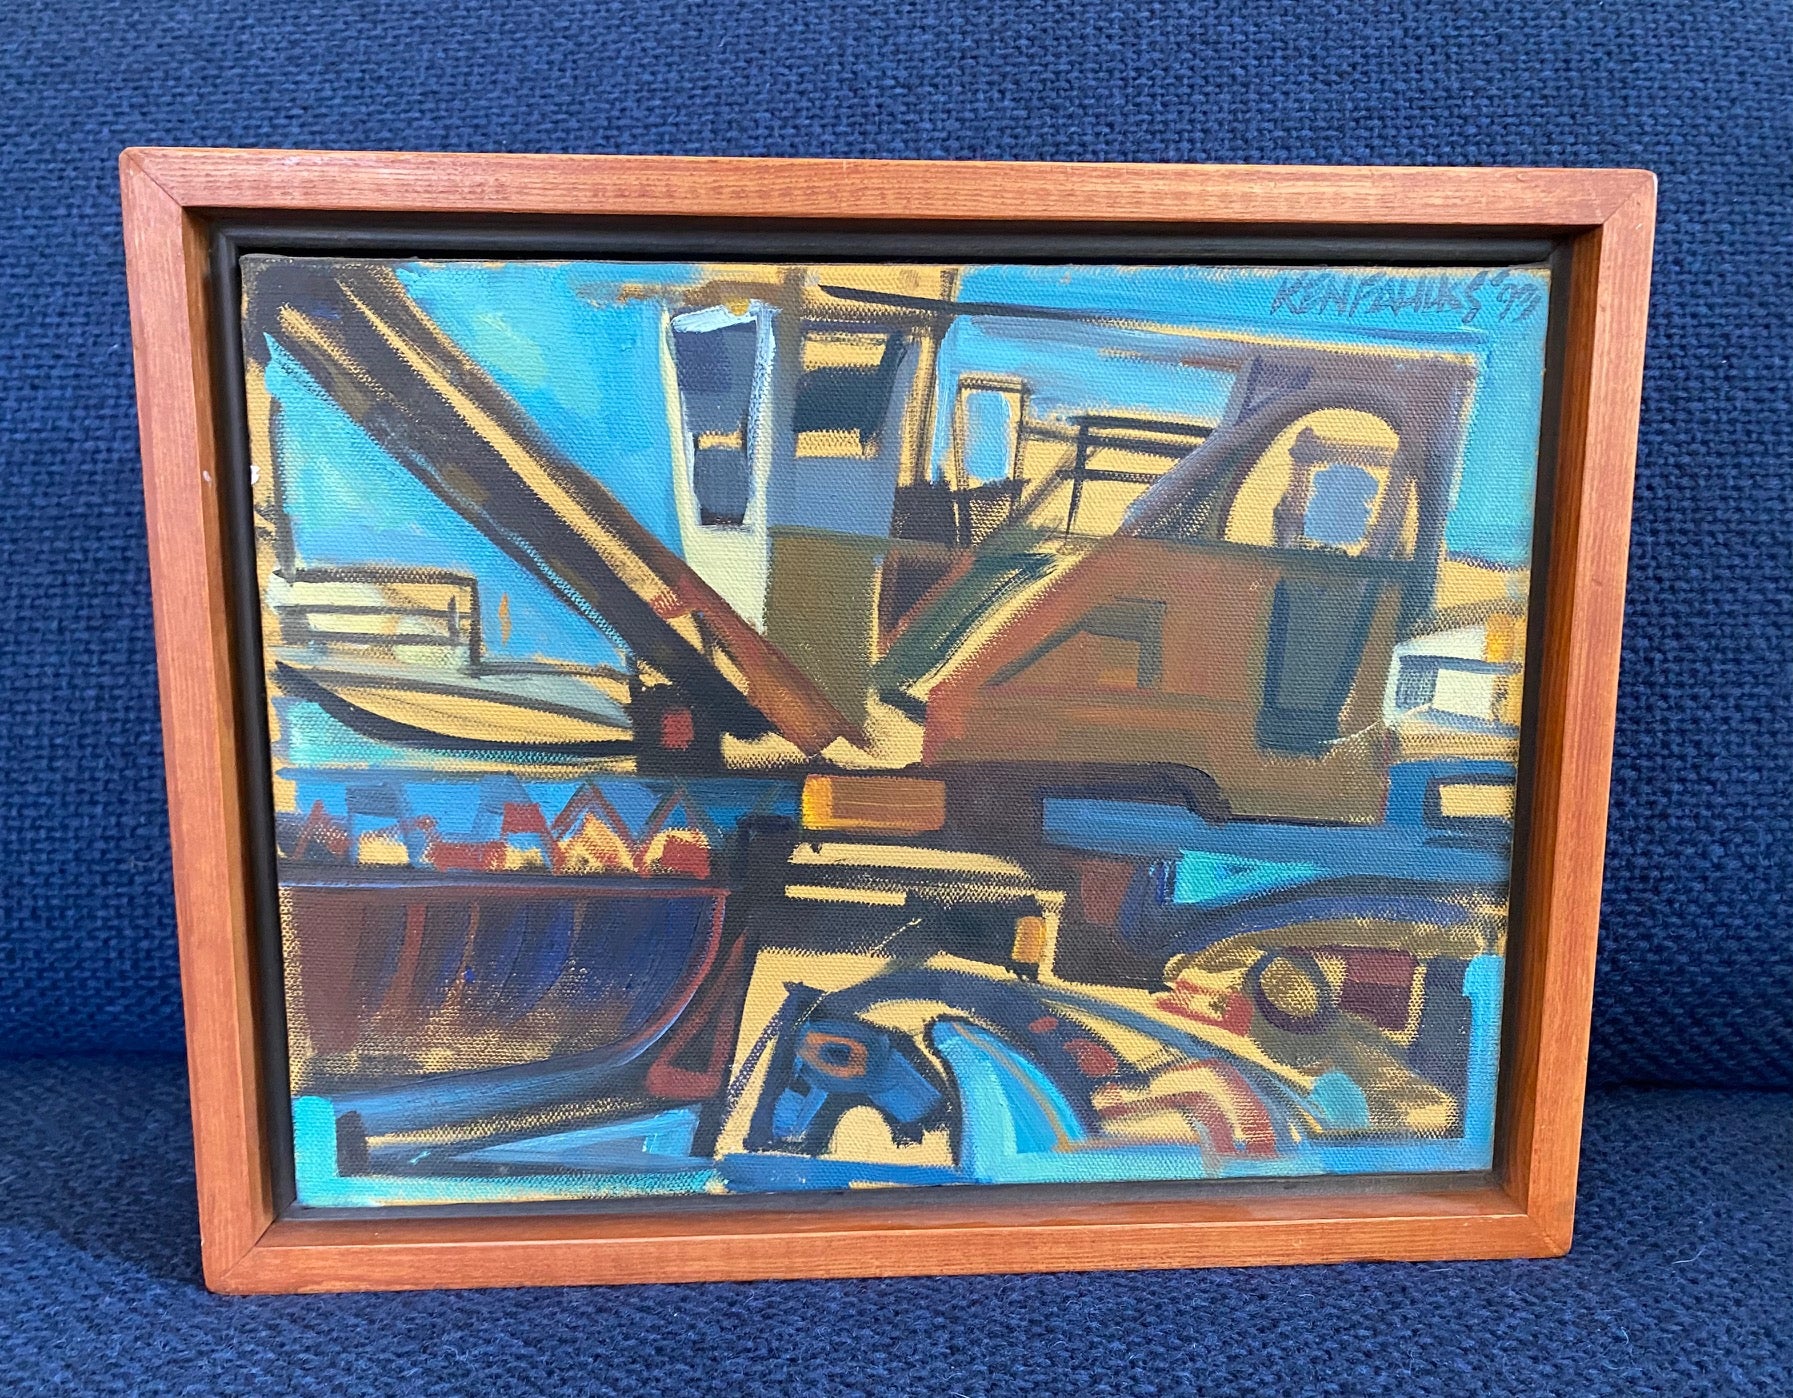 Fun abstract oil of front end loader in blues and browns on canvas, "Junk Eater" by Ken Faulks, 1993- Cook Street Vintage